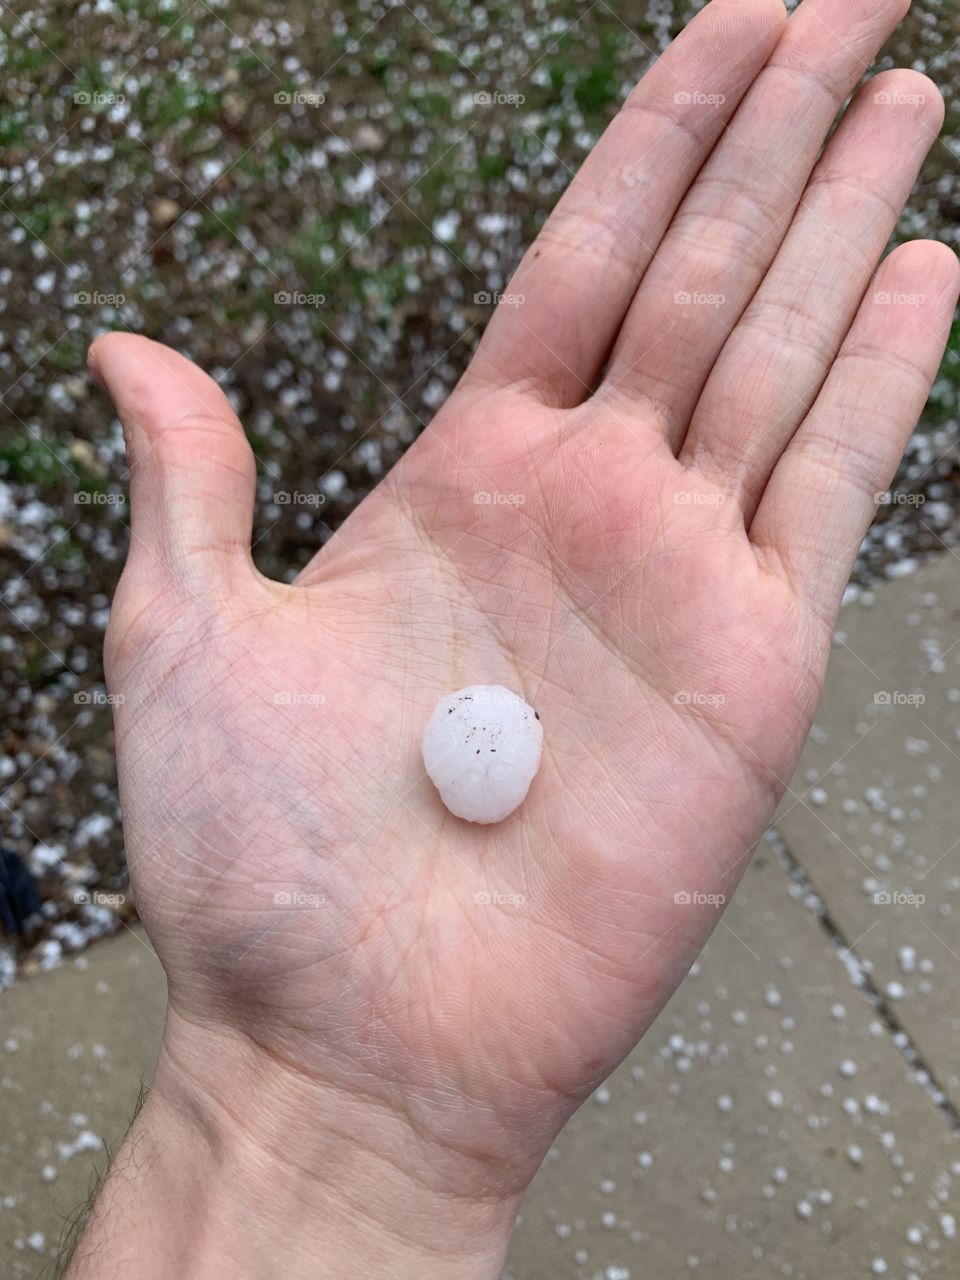 Marble Sized Hail in a Hail Storm